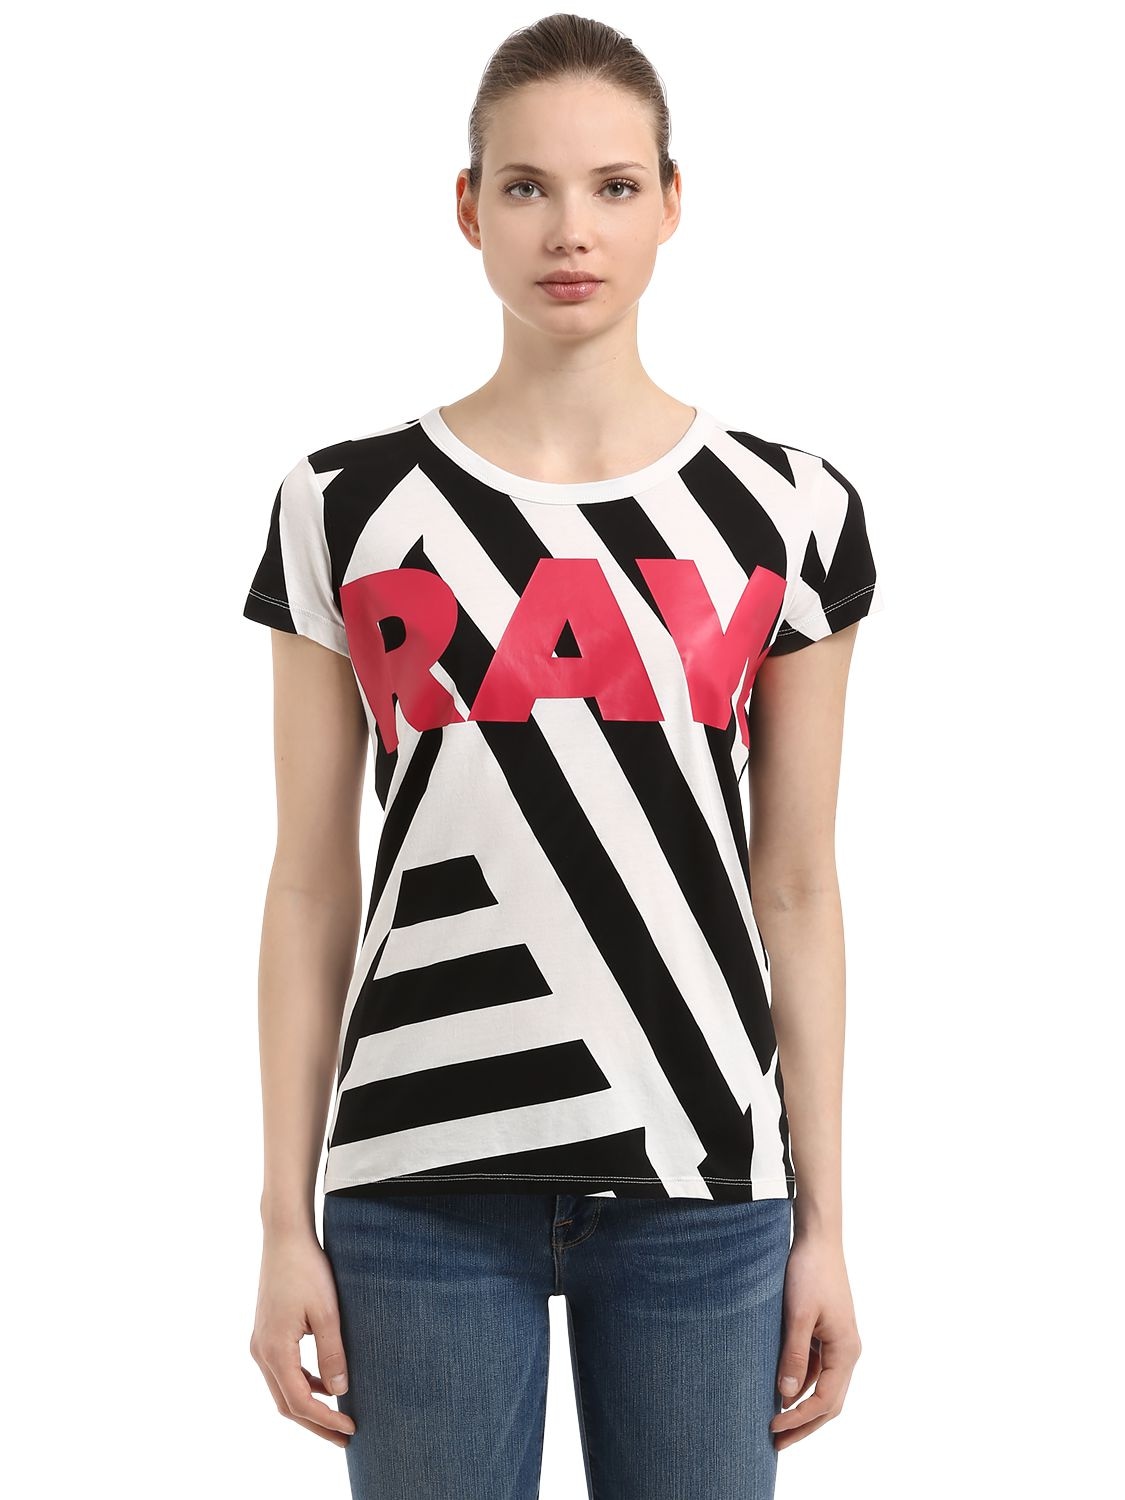 G-star By Pharrell Williams Dazzle Camouflage Print Cotton T-shirt In Black/white